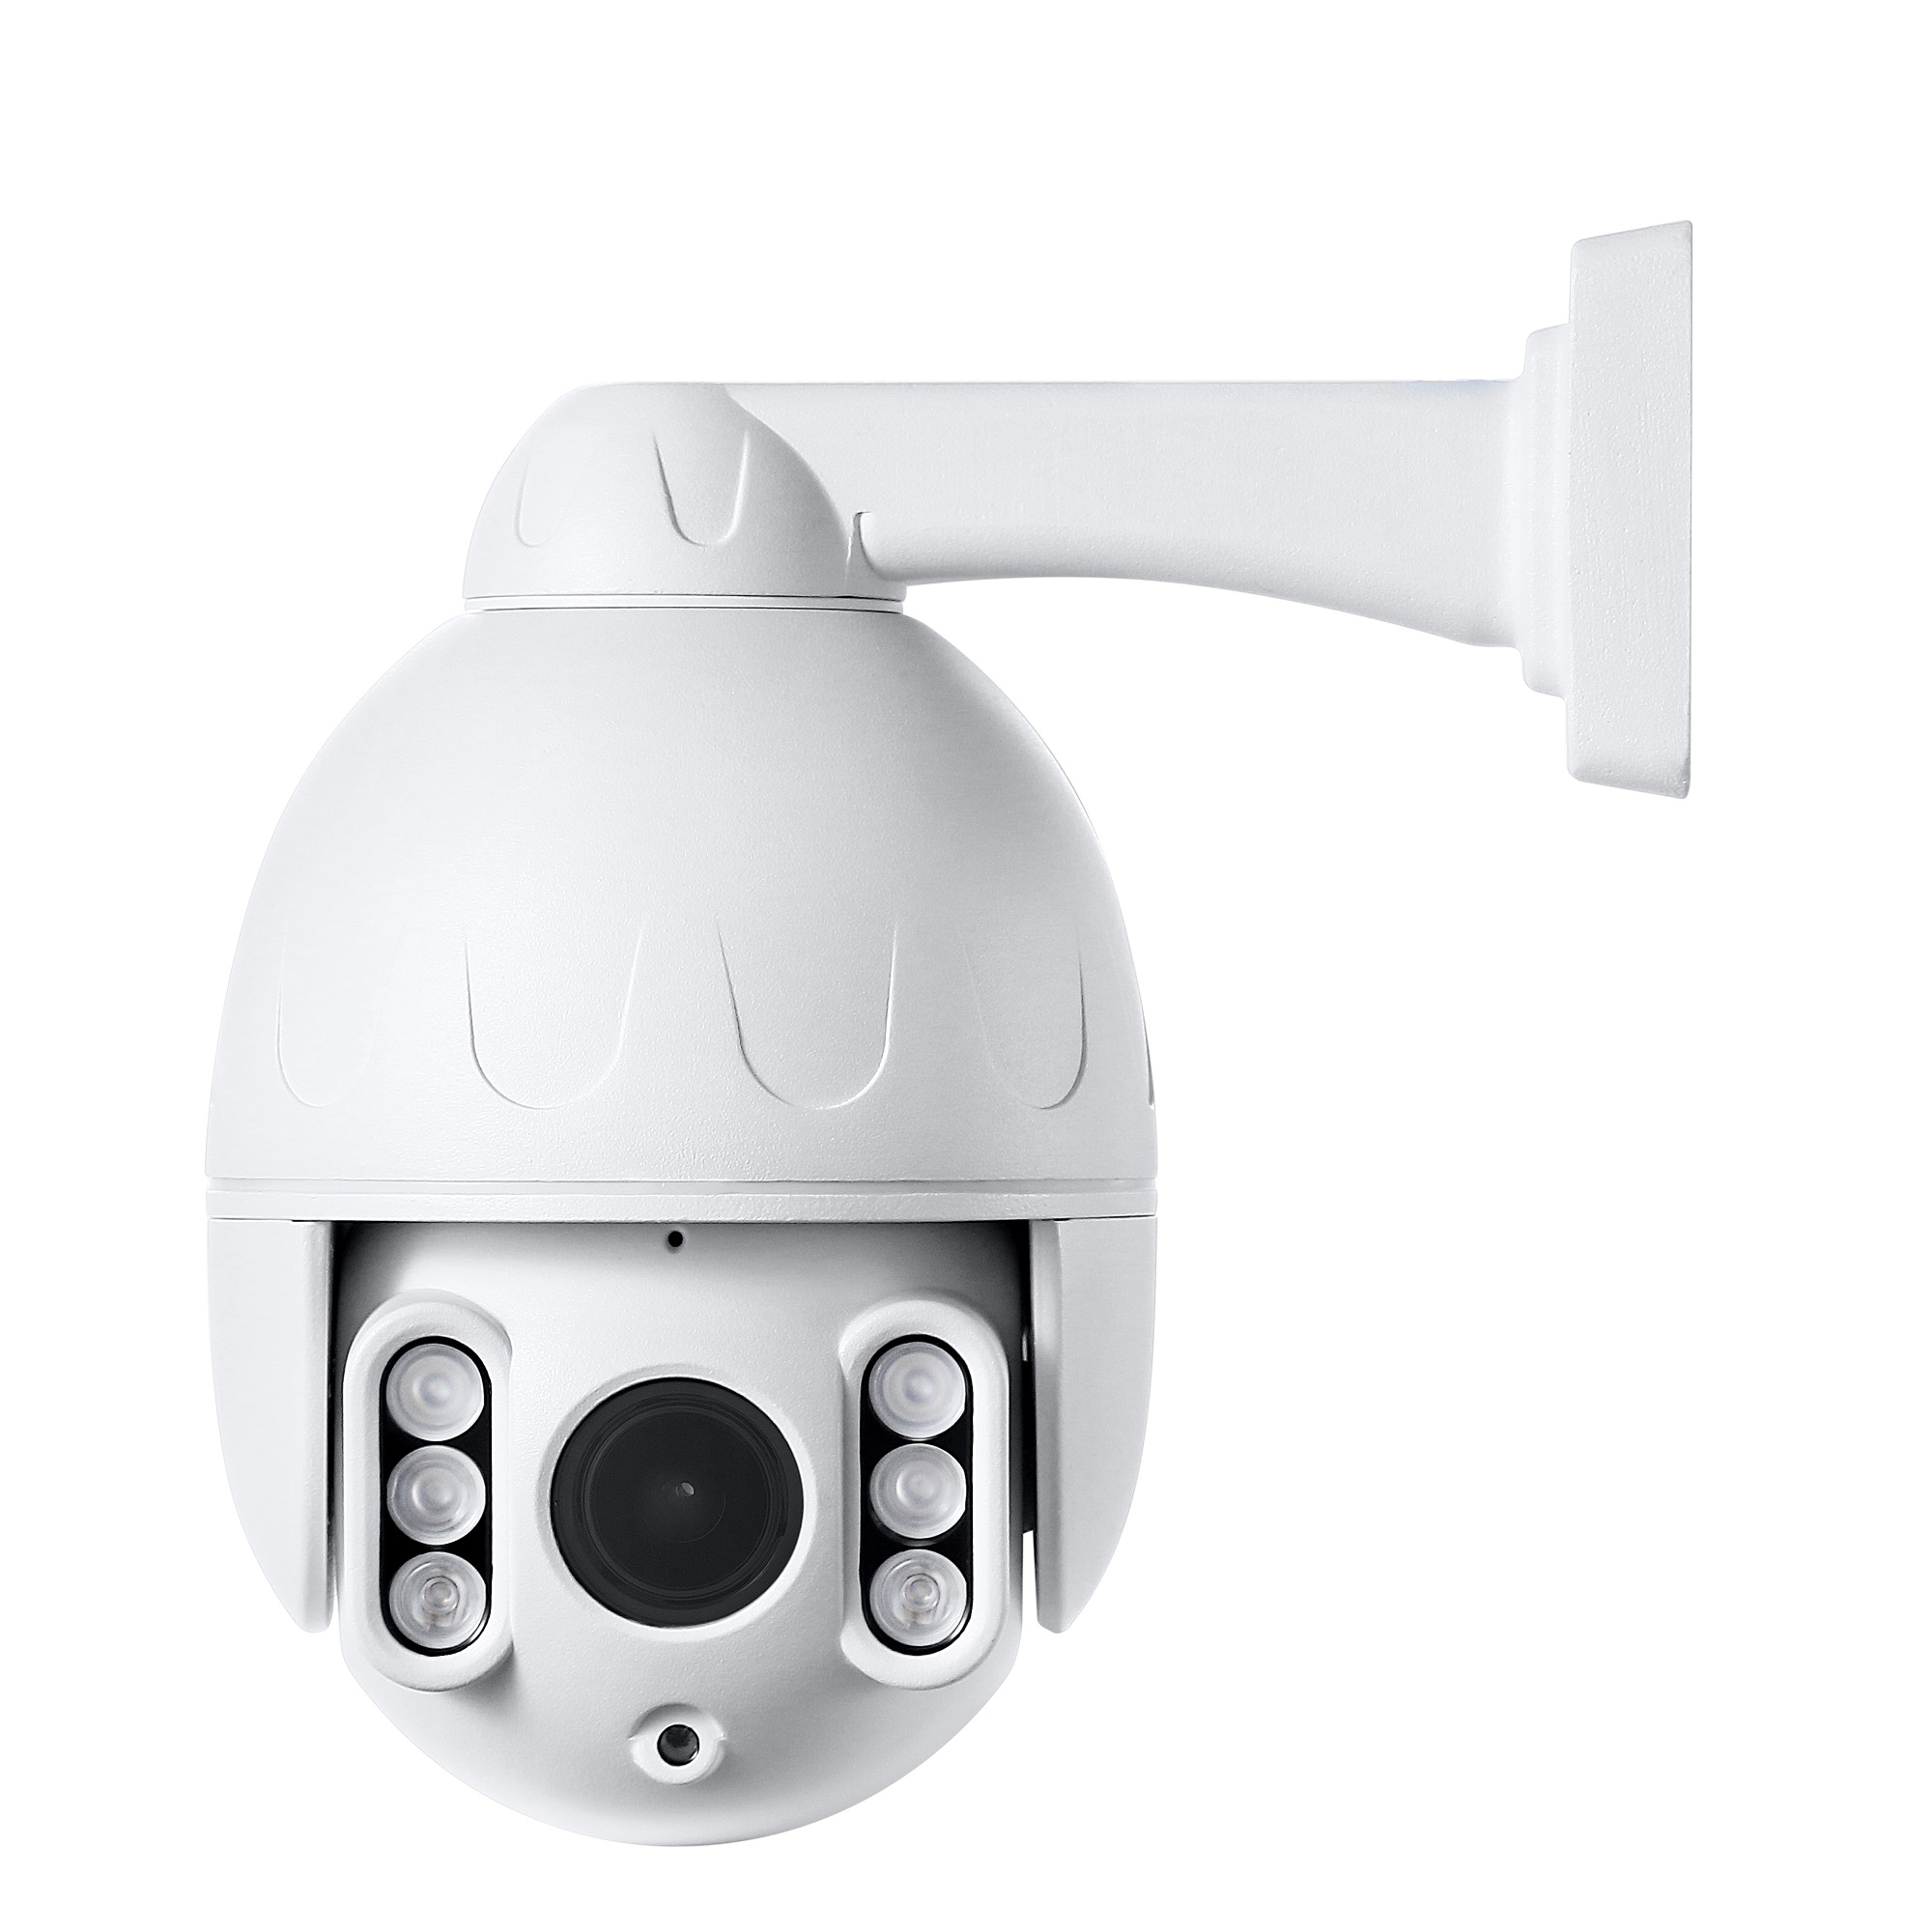 Outdoor 2.5inch 5MP IP POE PTZ Dome Security Camera Pan Tilt 4X Optical Zoom 165FT IR Night Vision Motion Detection Remote View RTSP SD Recording Support AT-500PE